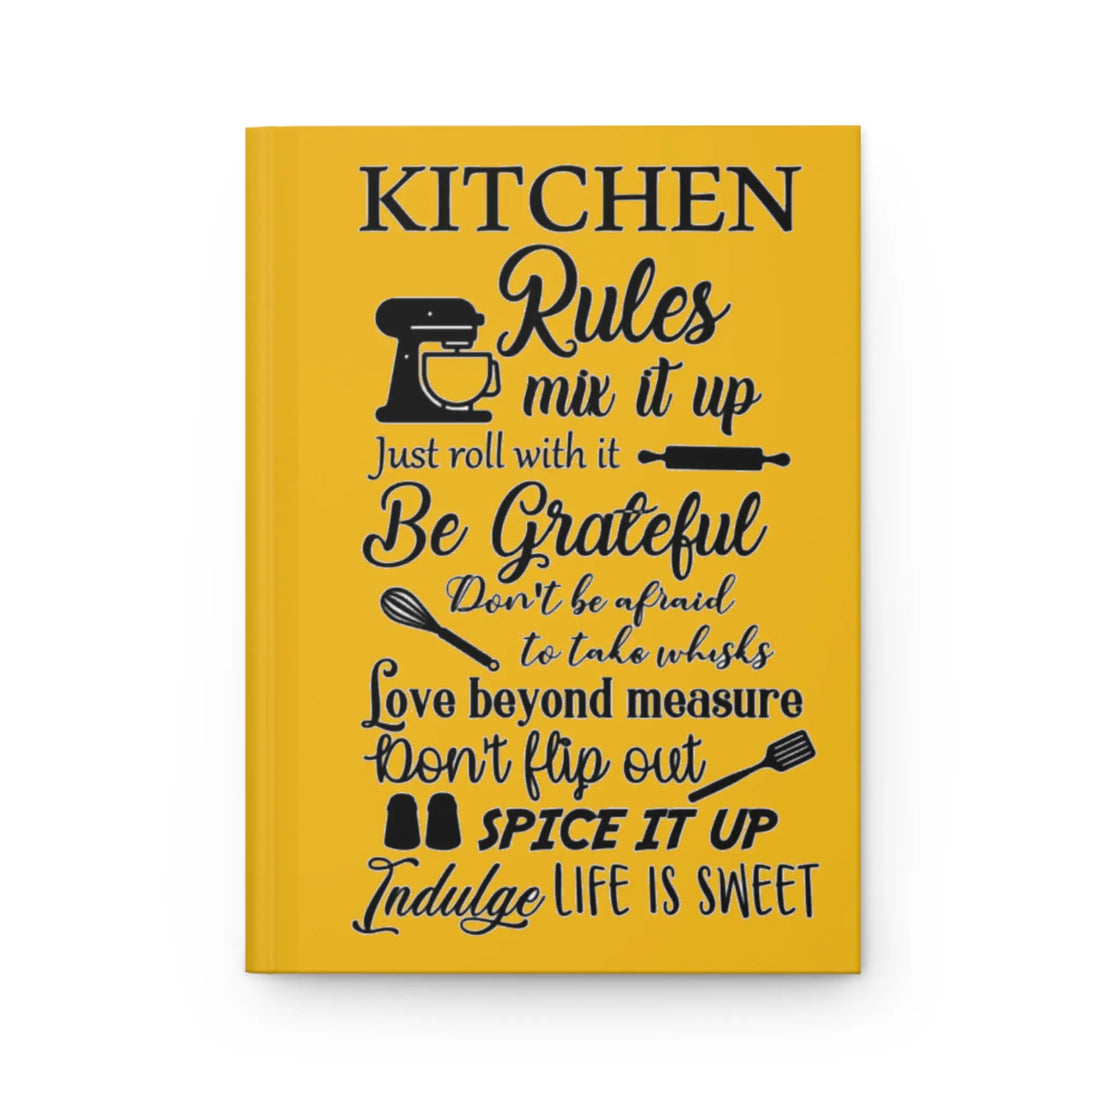 Hardcover Journal Matte Kitchen rules recipe book Personalized Home-clothes-jewelry